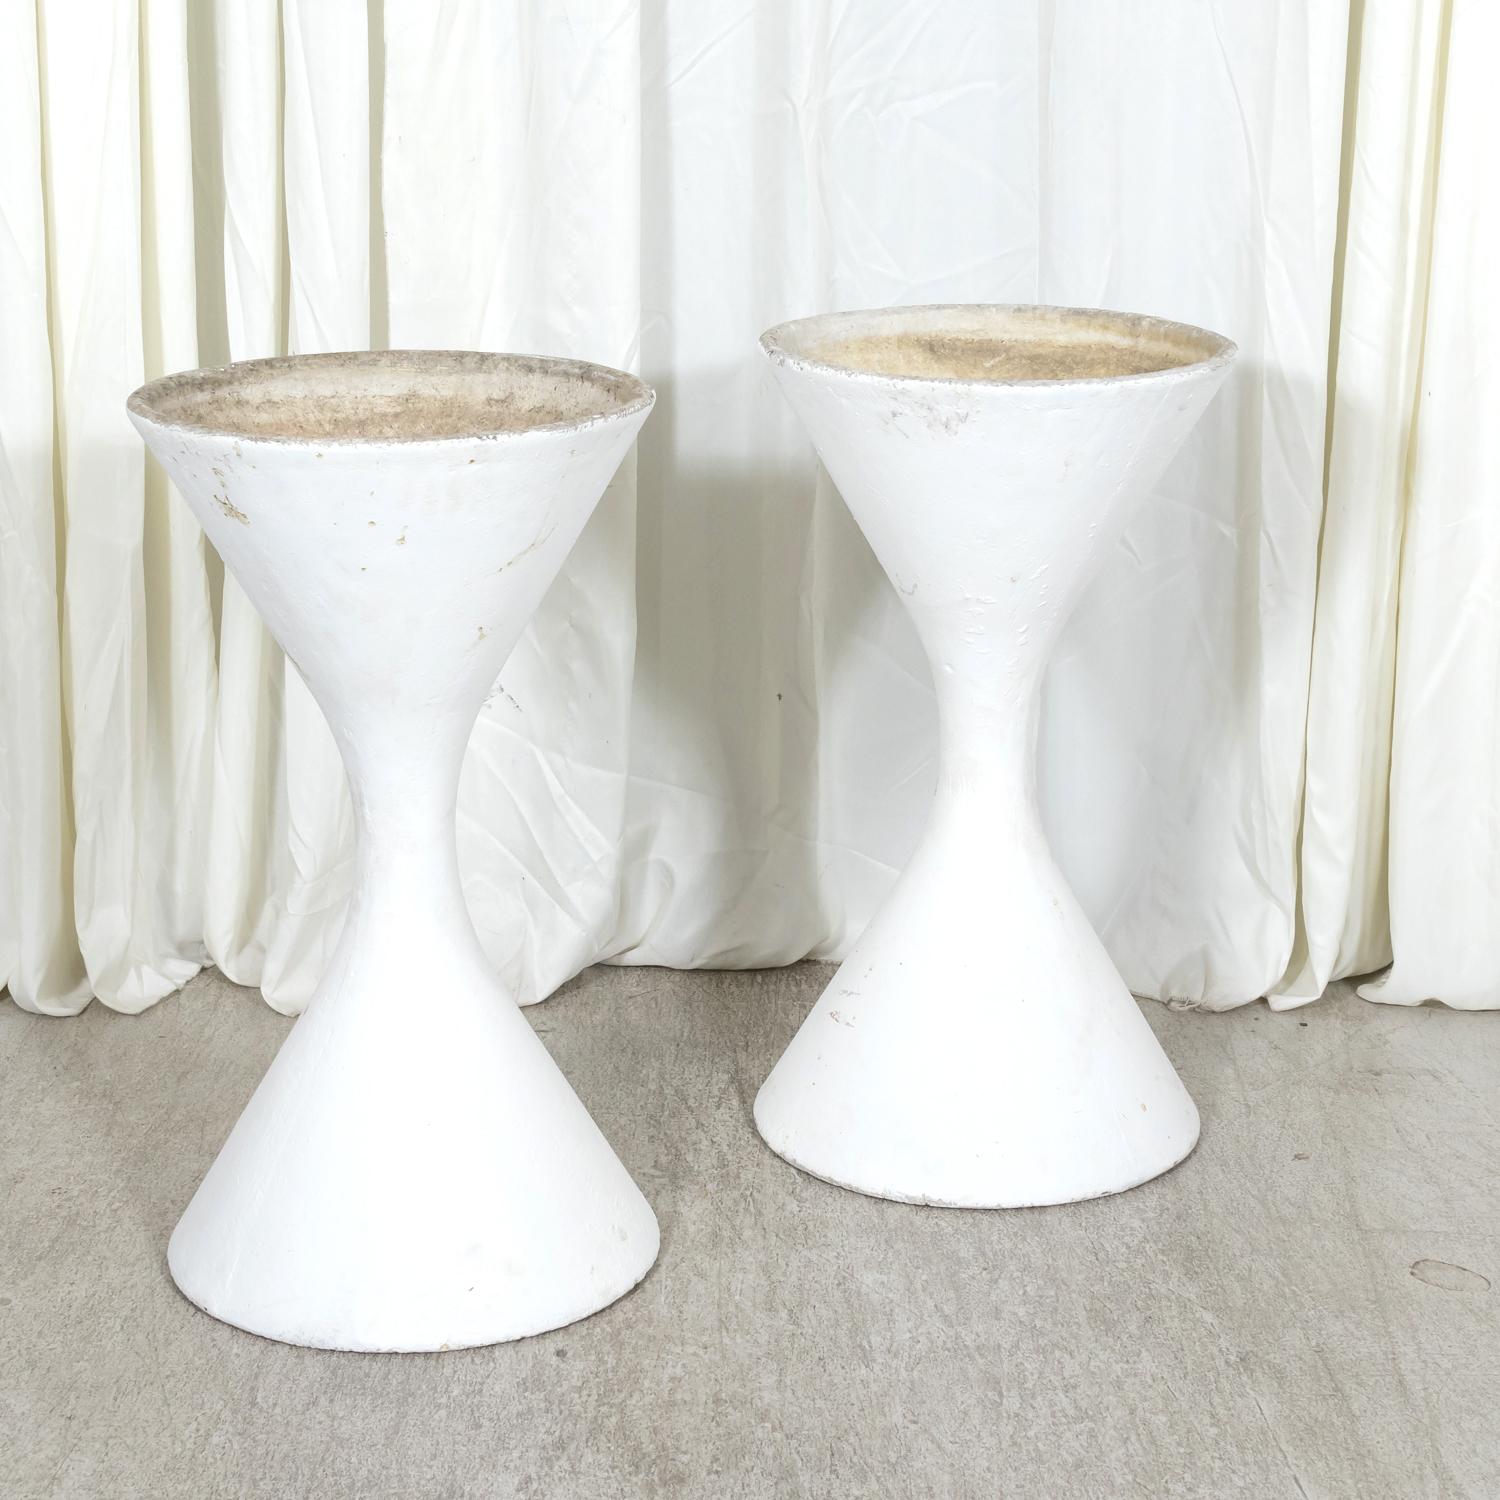  Pair of Mid-Century Modern Willy Guhl X-Large Hourglass Diablo Planters For Sale 5